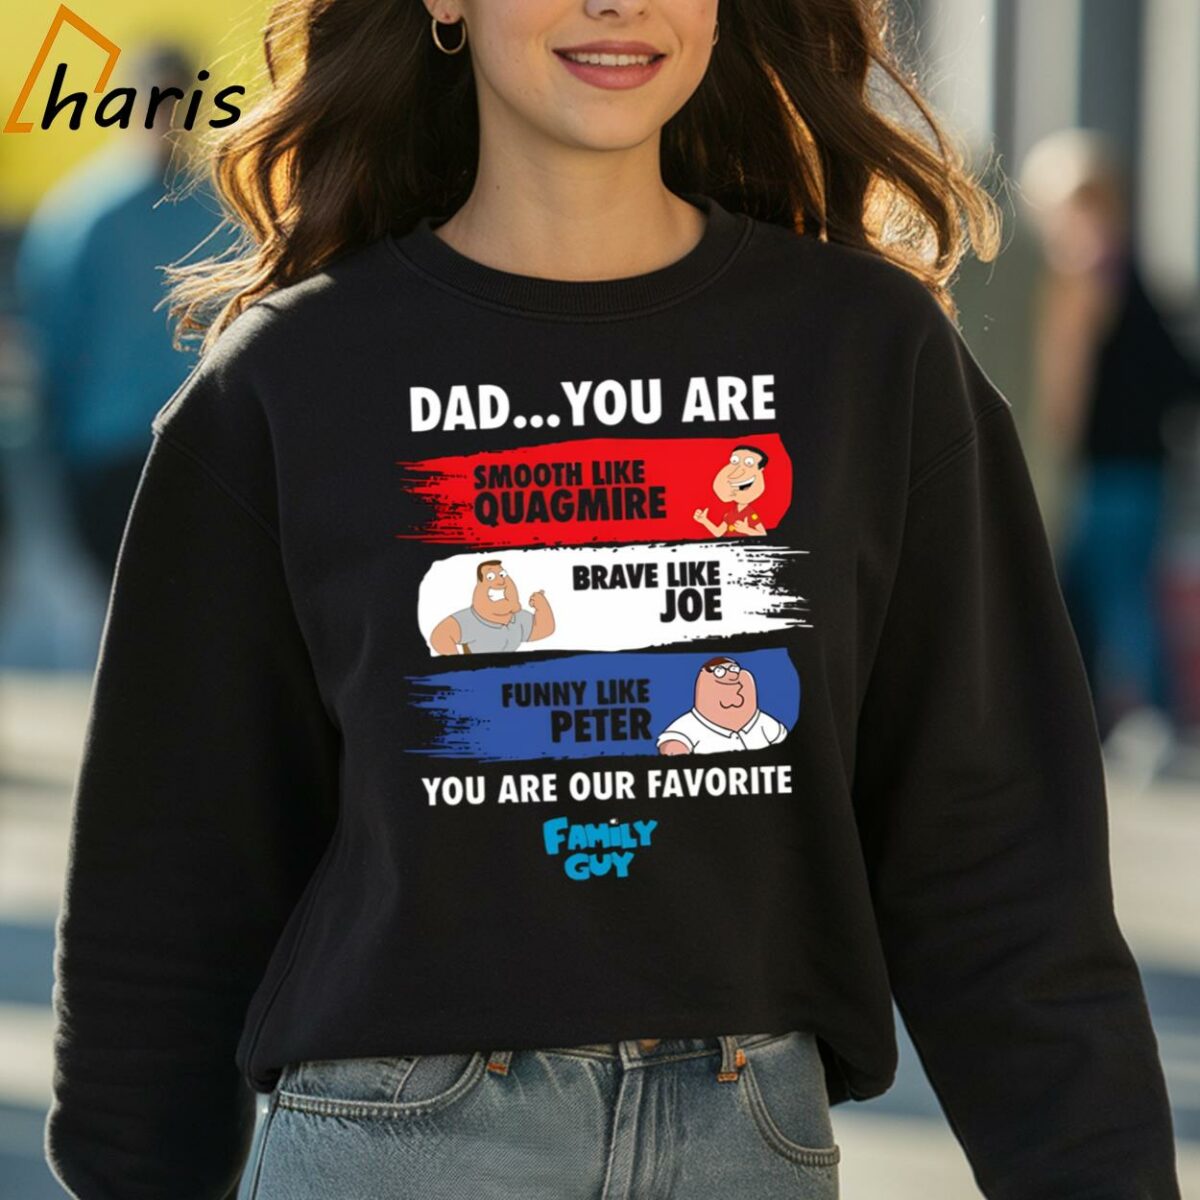 Dad You Are Smooth Like Quagmire Brave Like Joe Funny Like Peter You Are Our Favorite Family Guy Shirt 3 sweatshirt